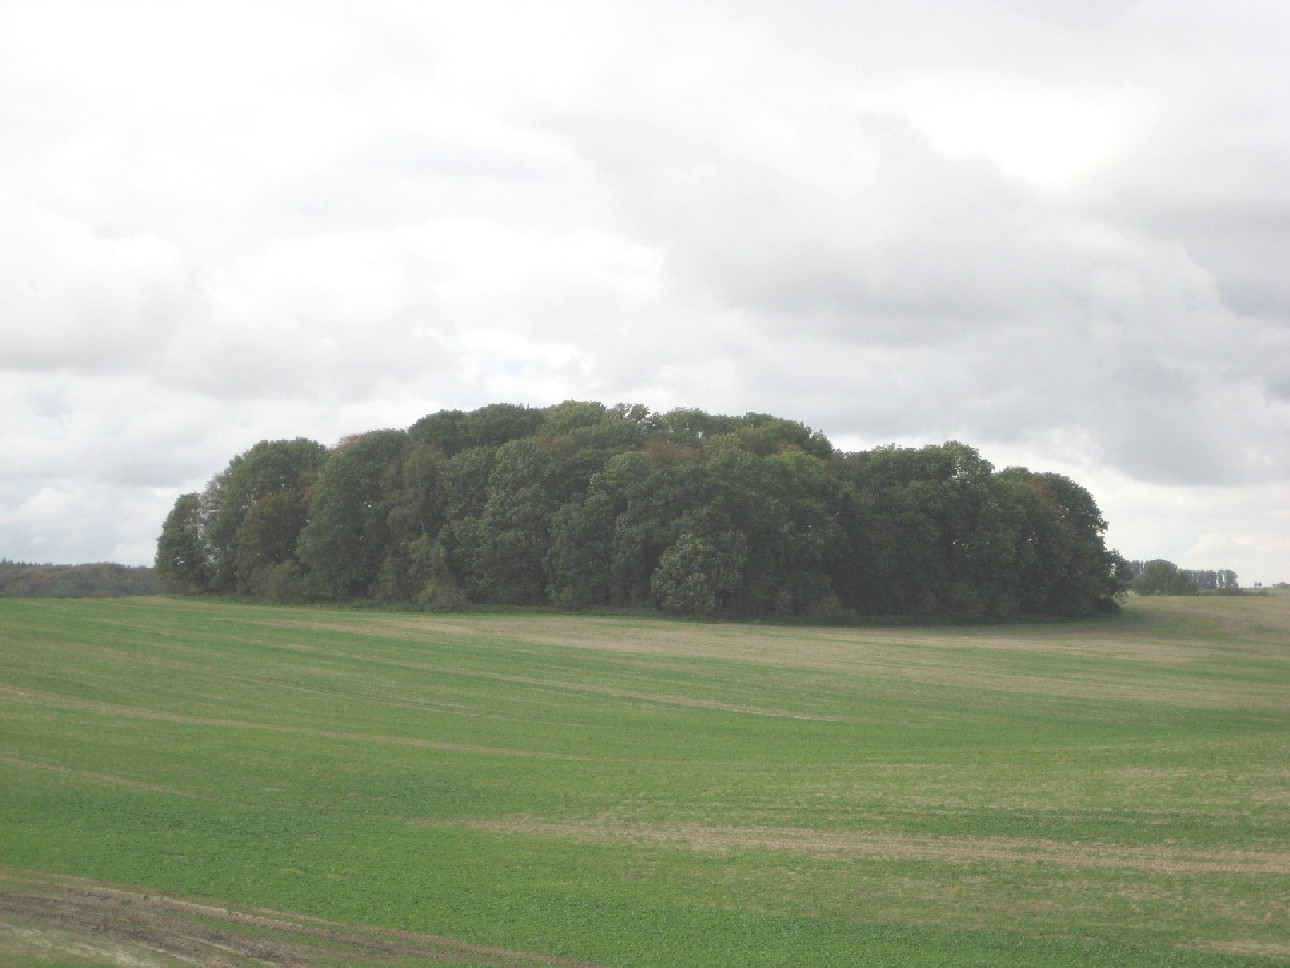 Very large barrow on the Island of Rügen.
The name suggest a Pagan Ritual use. 
